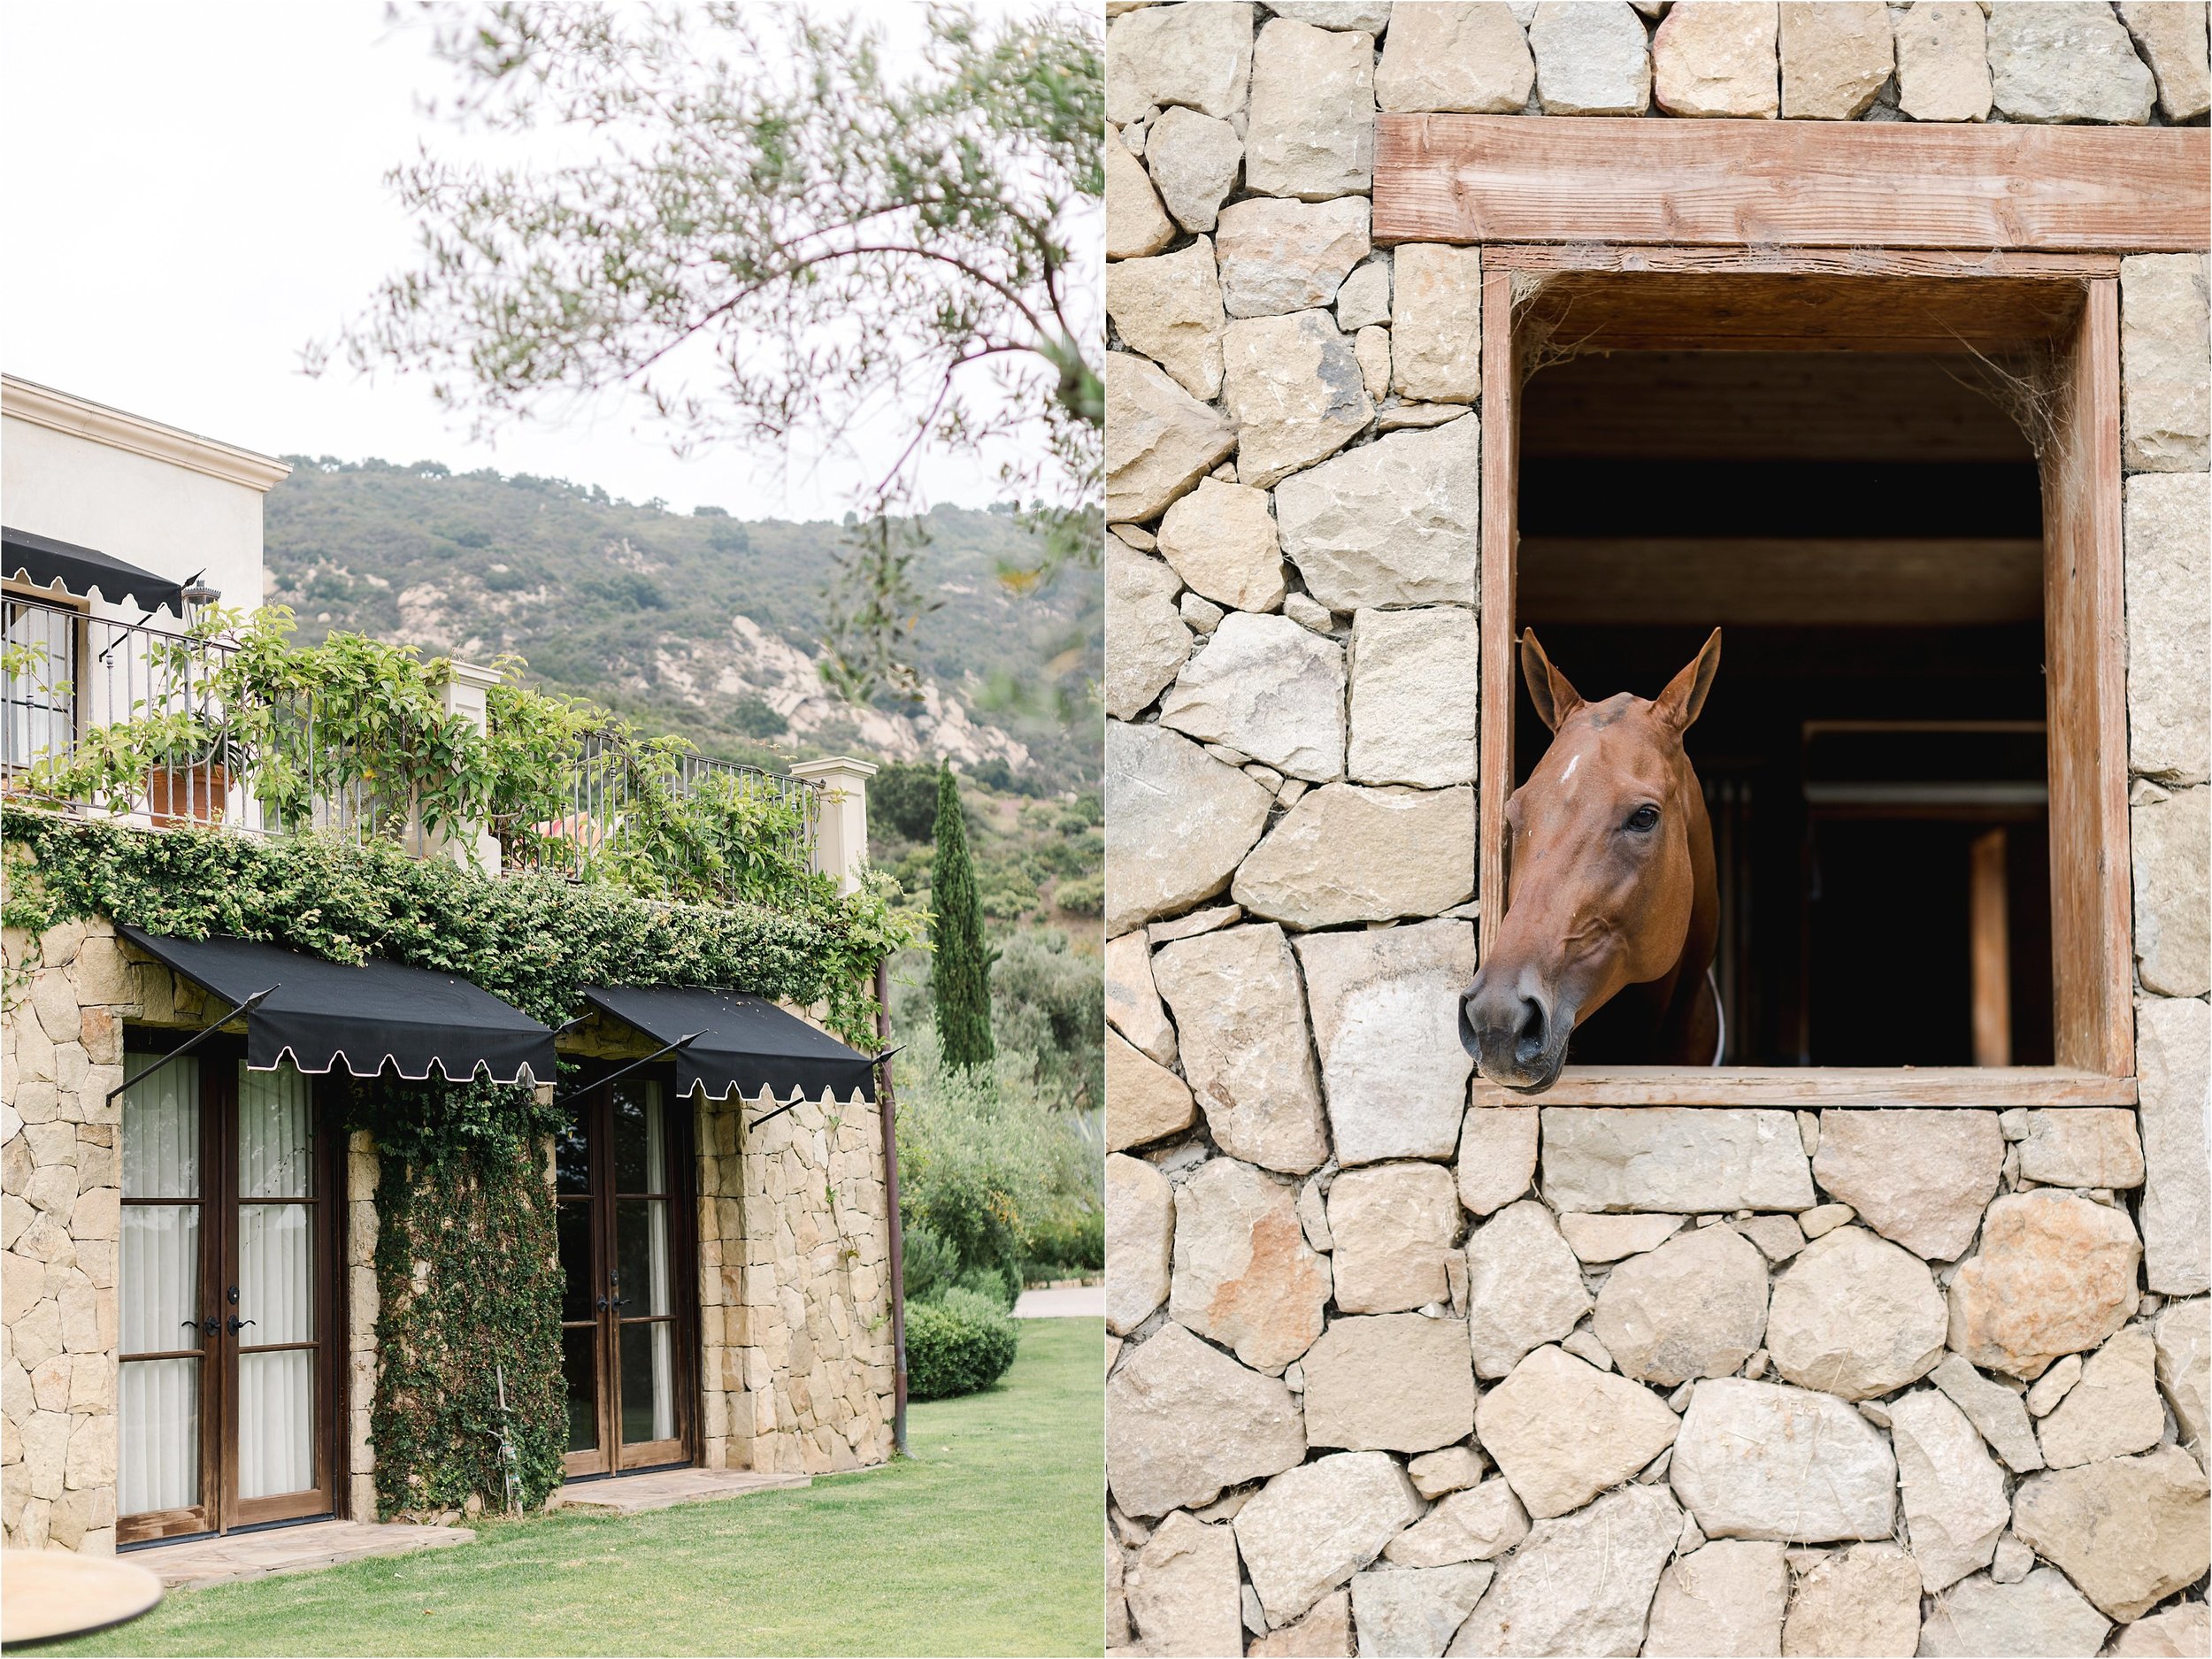 The image on the left shows a beautiful stone building with black awnings and vines creeping along the walls. The image on the right shows a chestnut colored horse peeking its head out of the stone barn window at Klenter Ranch, one of the top Southern California private estate wedding venues.